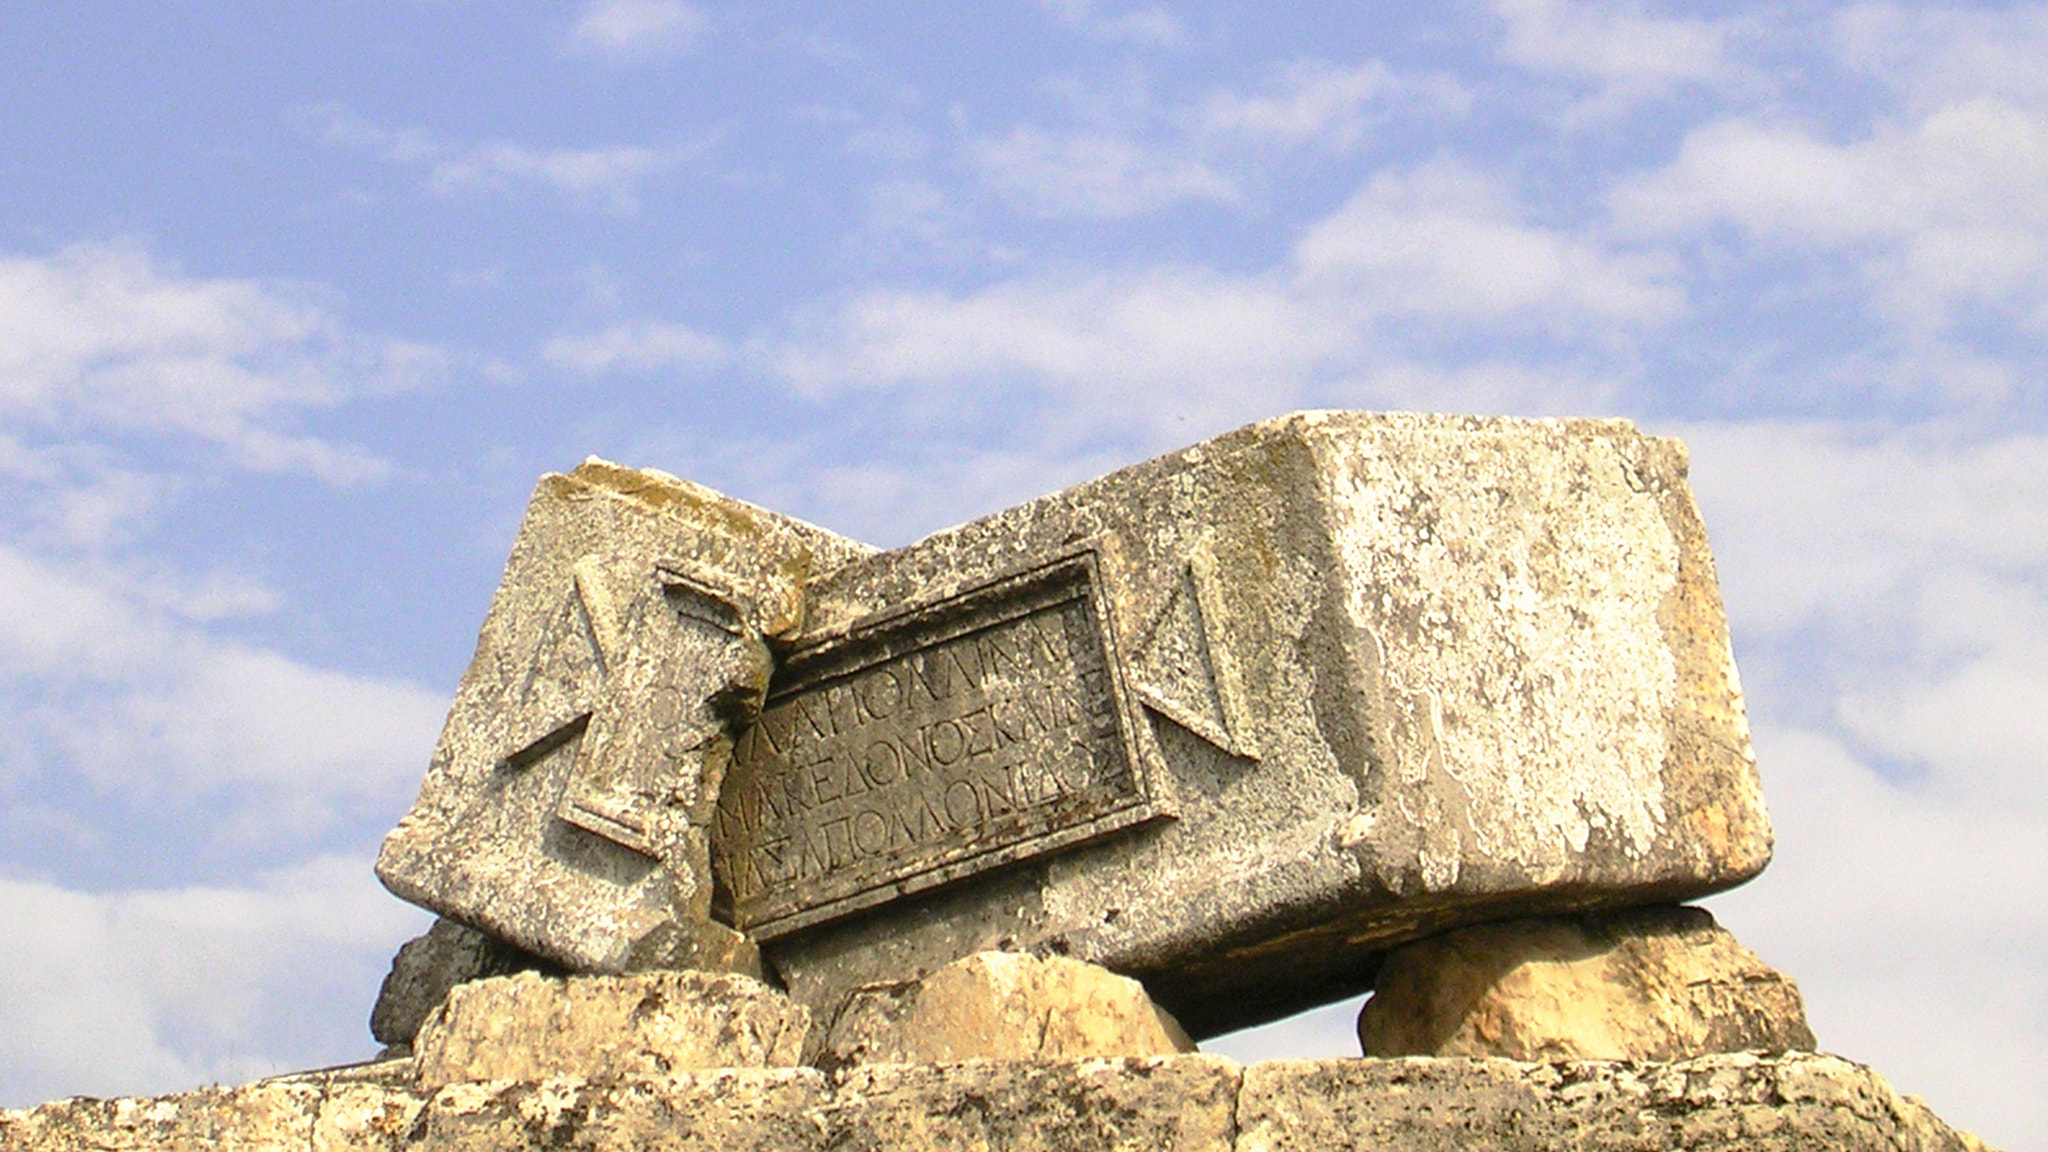 Nikon E3200 sample photo. Stone with ancient greek inscription carving in hierapolis photography